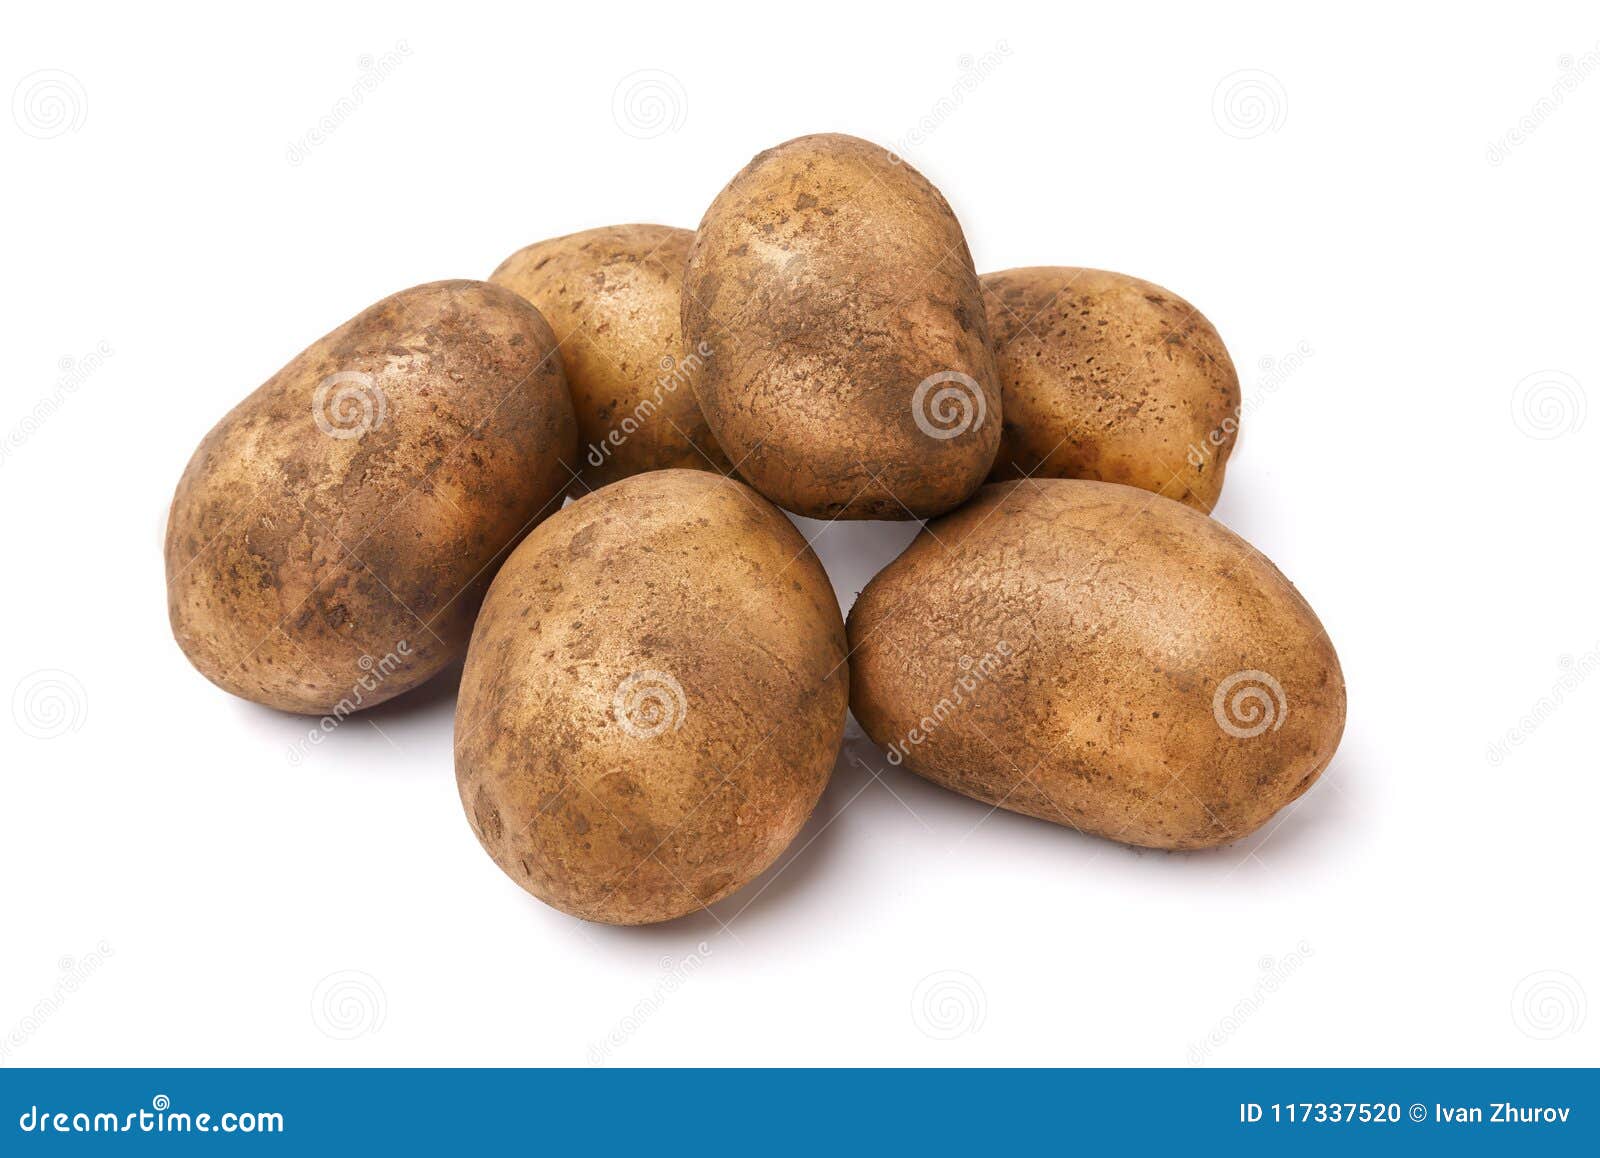 potato tubers isolated background preview